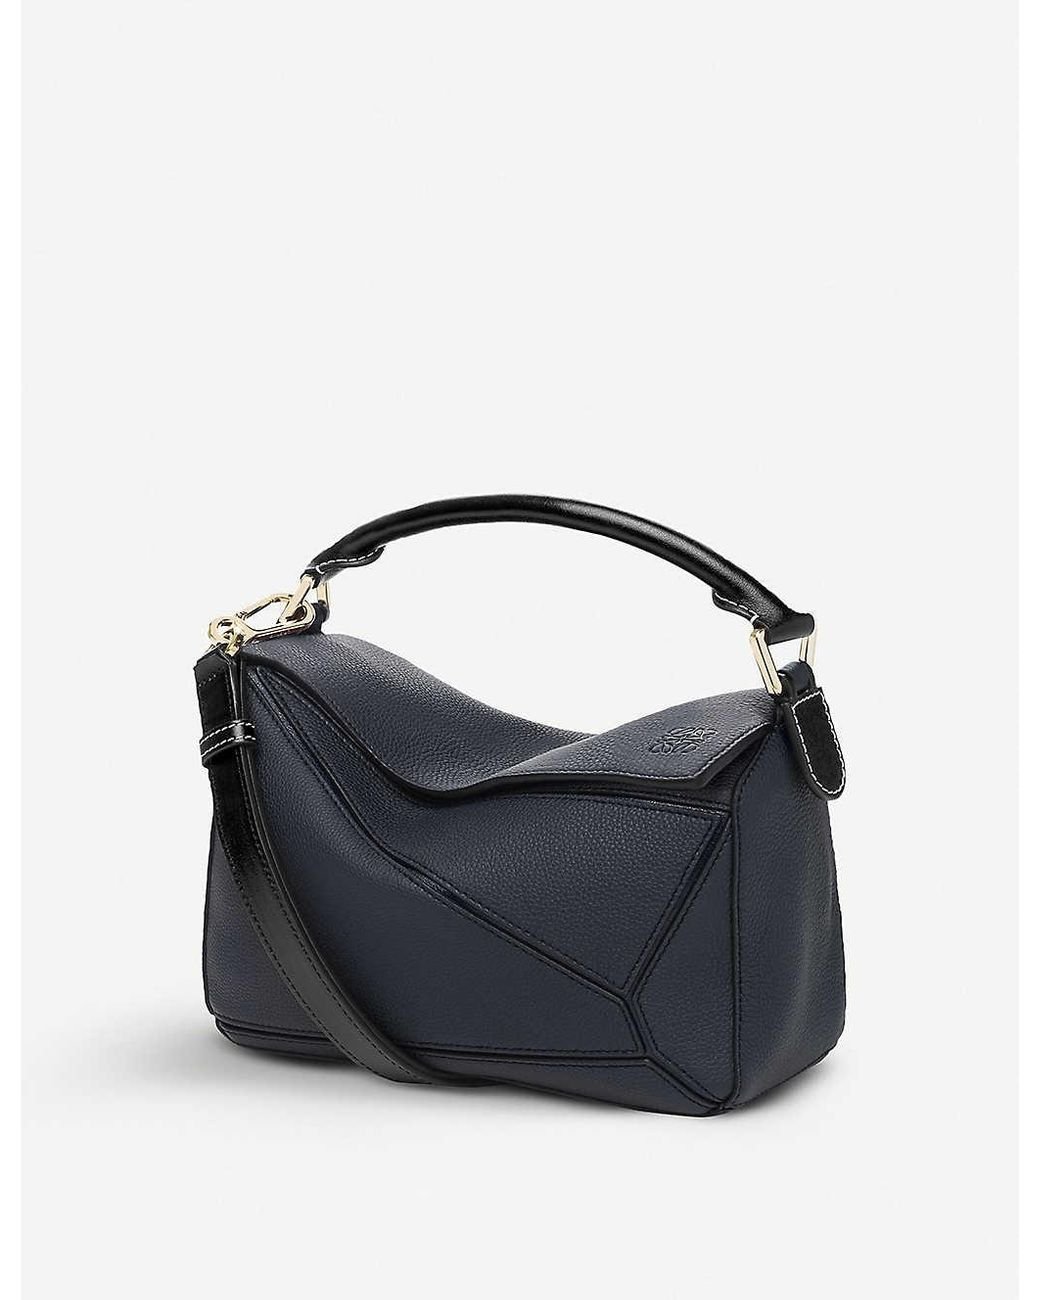 Got my dream Loewe small puzzle bag in midnight navy/black, pre-loved but  in stellar condition! I wanted one in a dark color with gold hardware and  this was one of the only